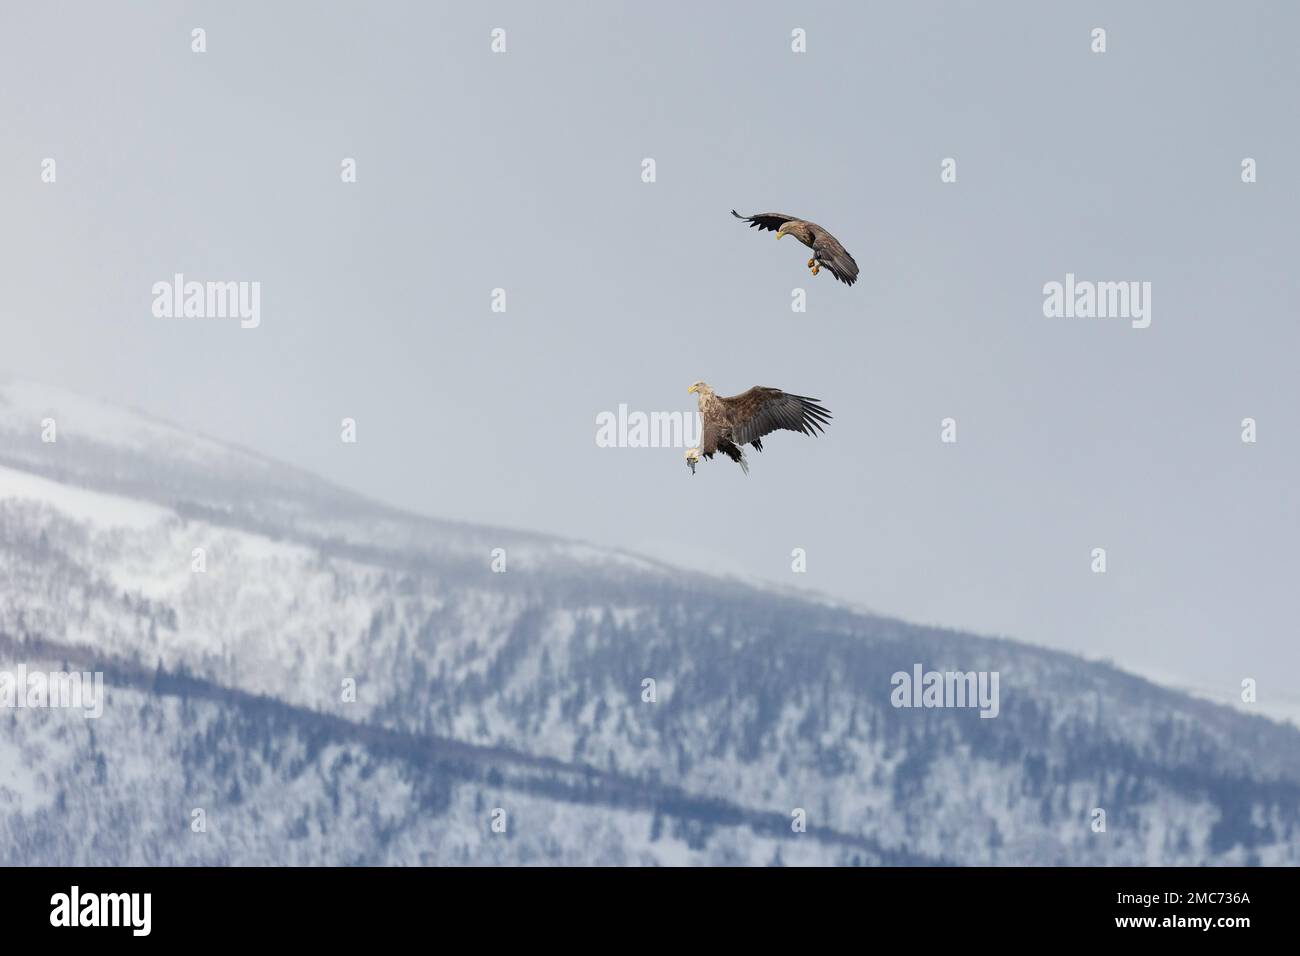 Pair of adult White-tailed Eagles (Haliaeetus albicilla) passing fish in flight over Shiretoko National Park, Hokkaido, Japan (sequence 5 of 7) Stock Photo